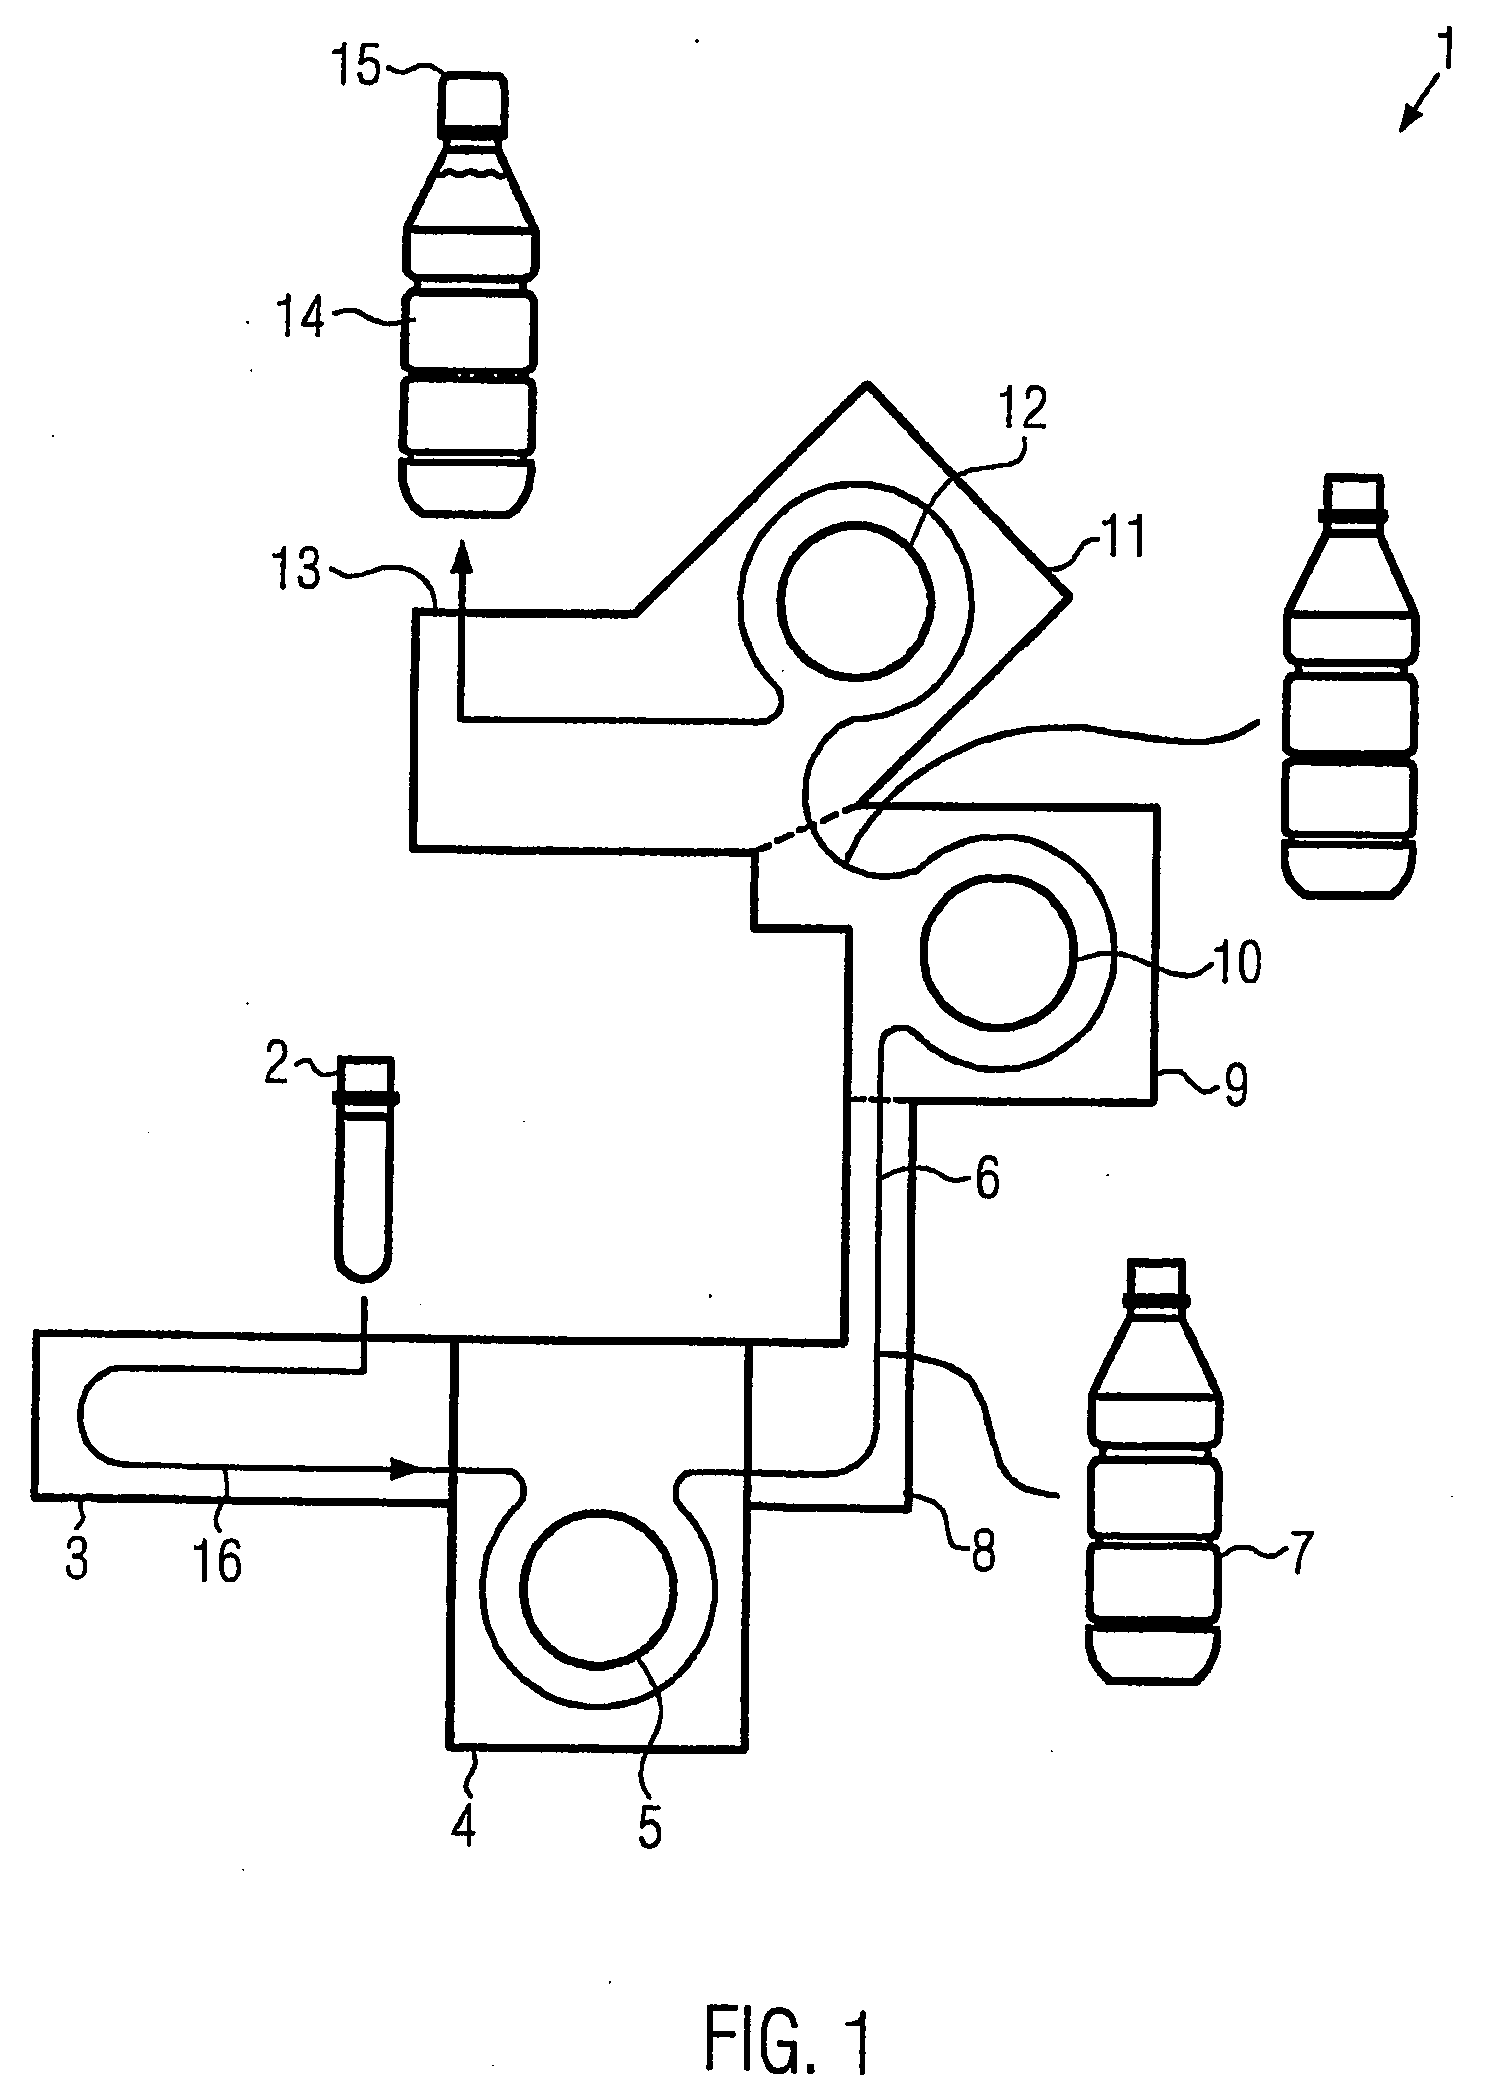 Method and device for the sterile filling with fluids